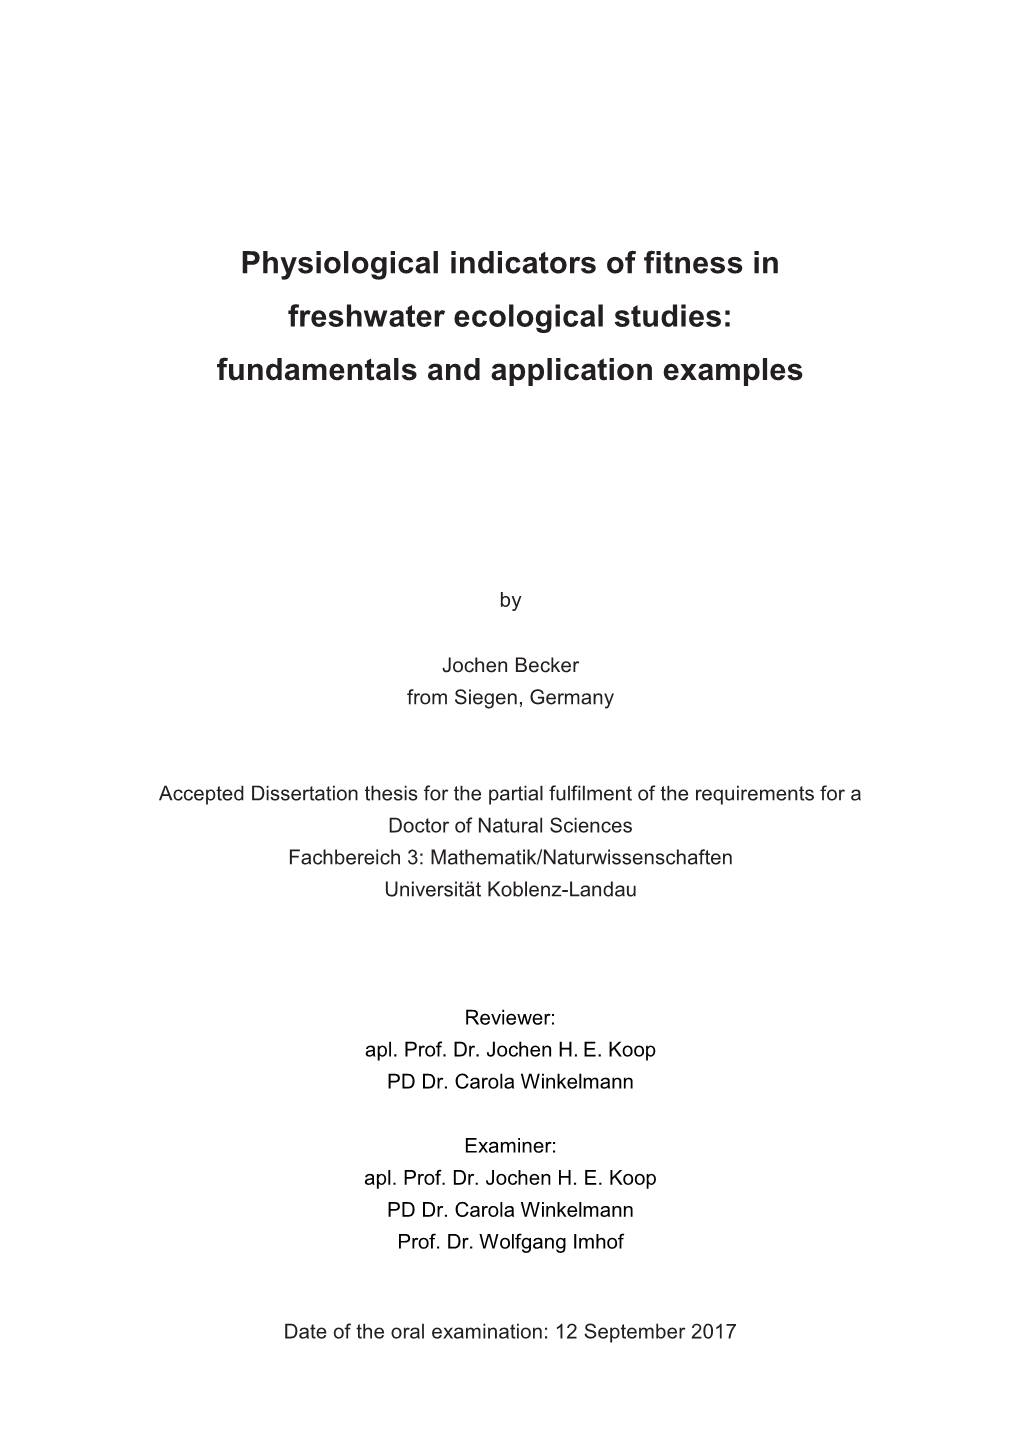 Physiological Indicators of Fitness in Freshwater Ecological Studies